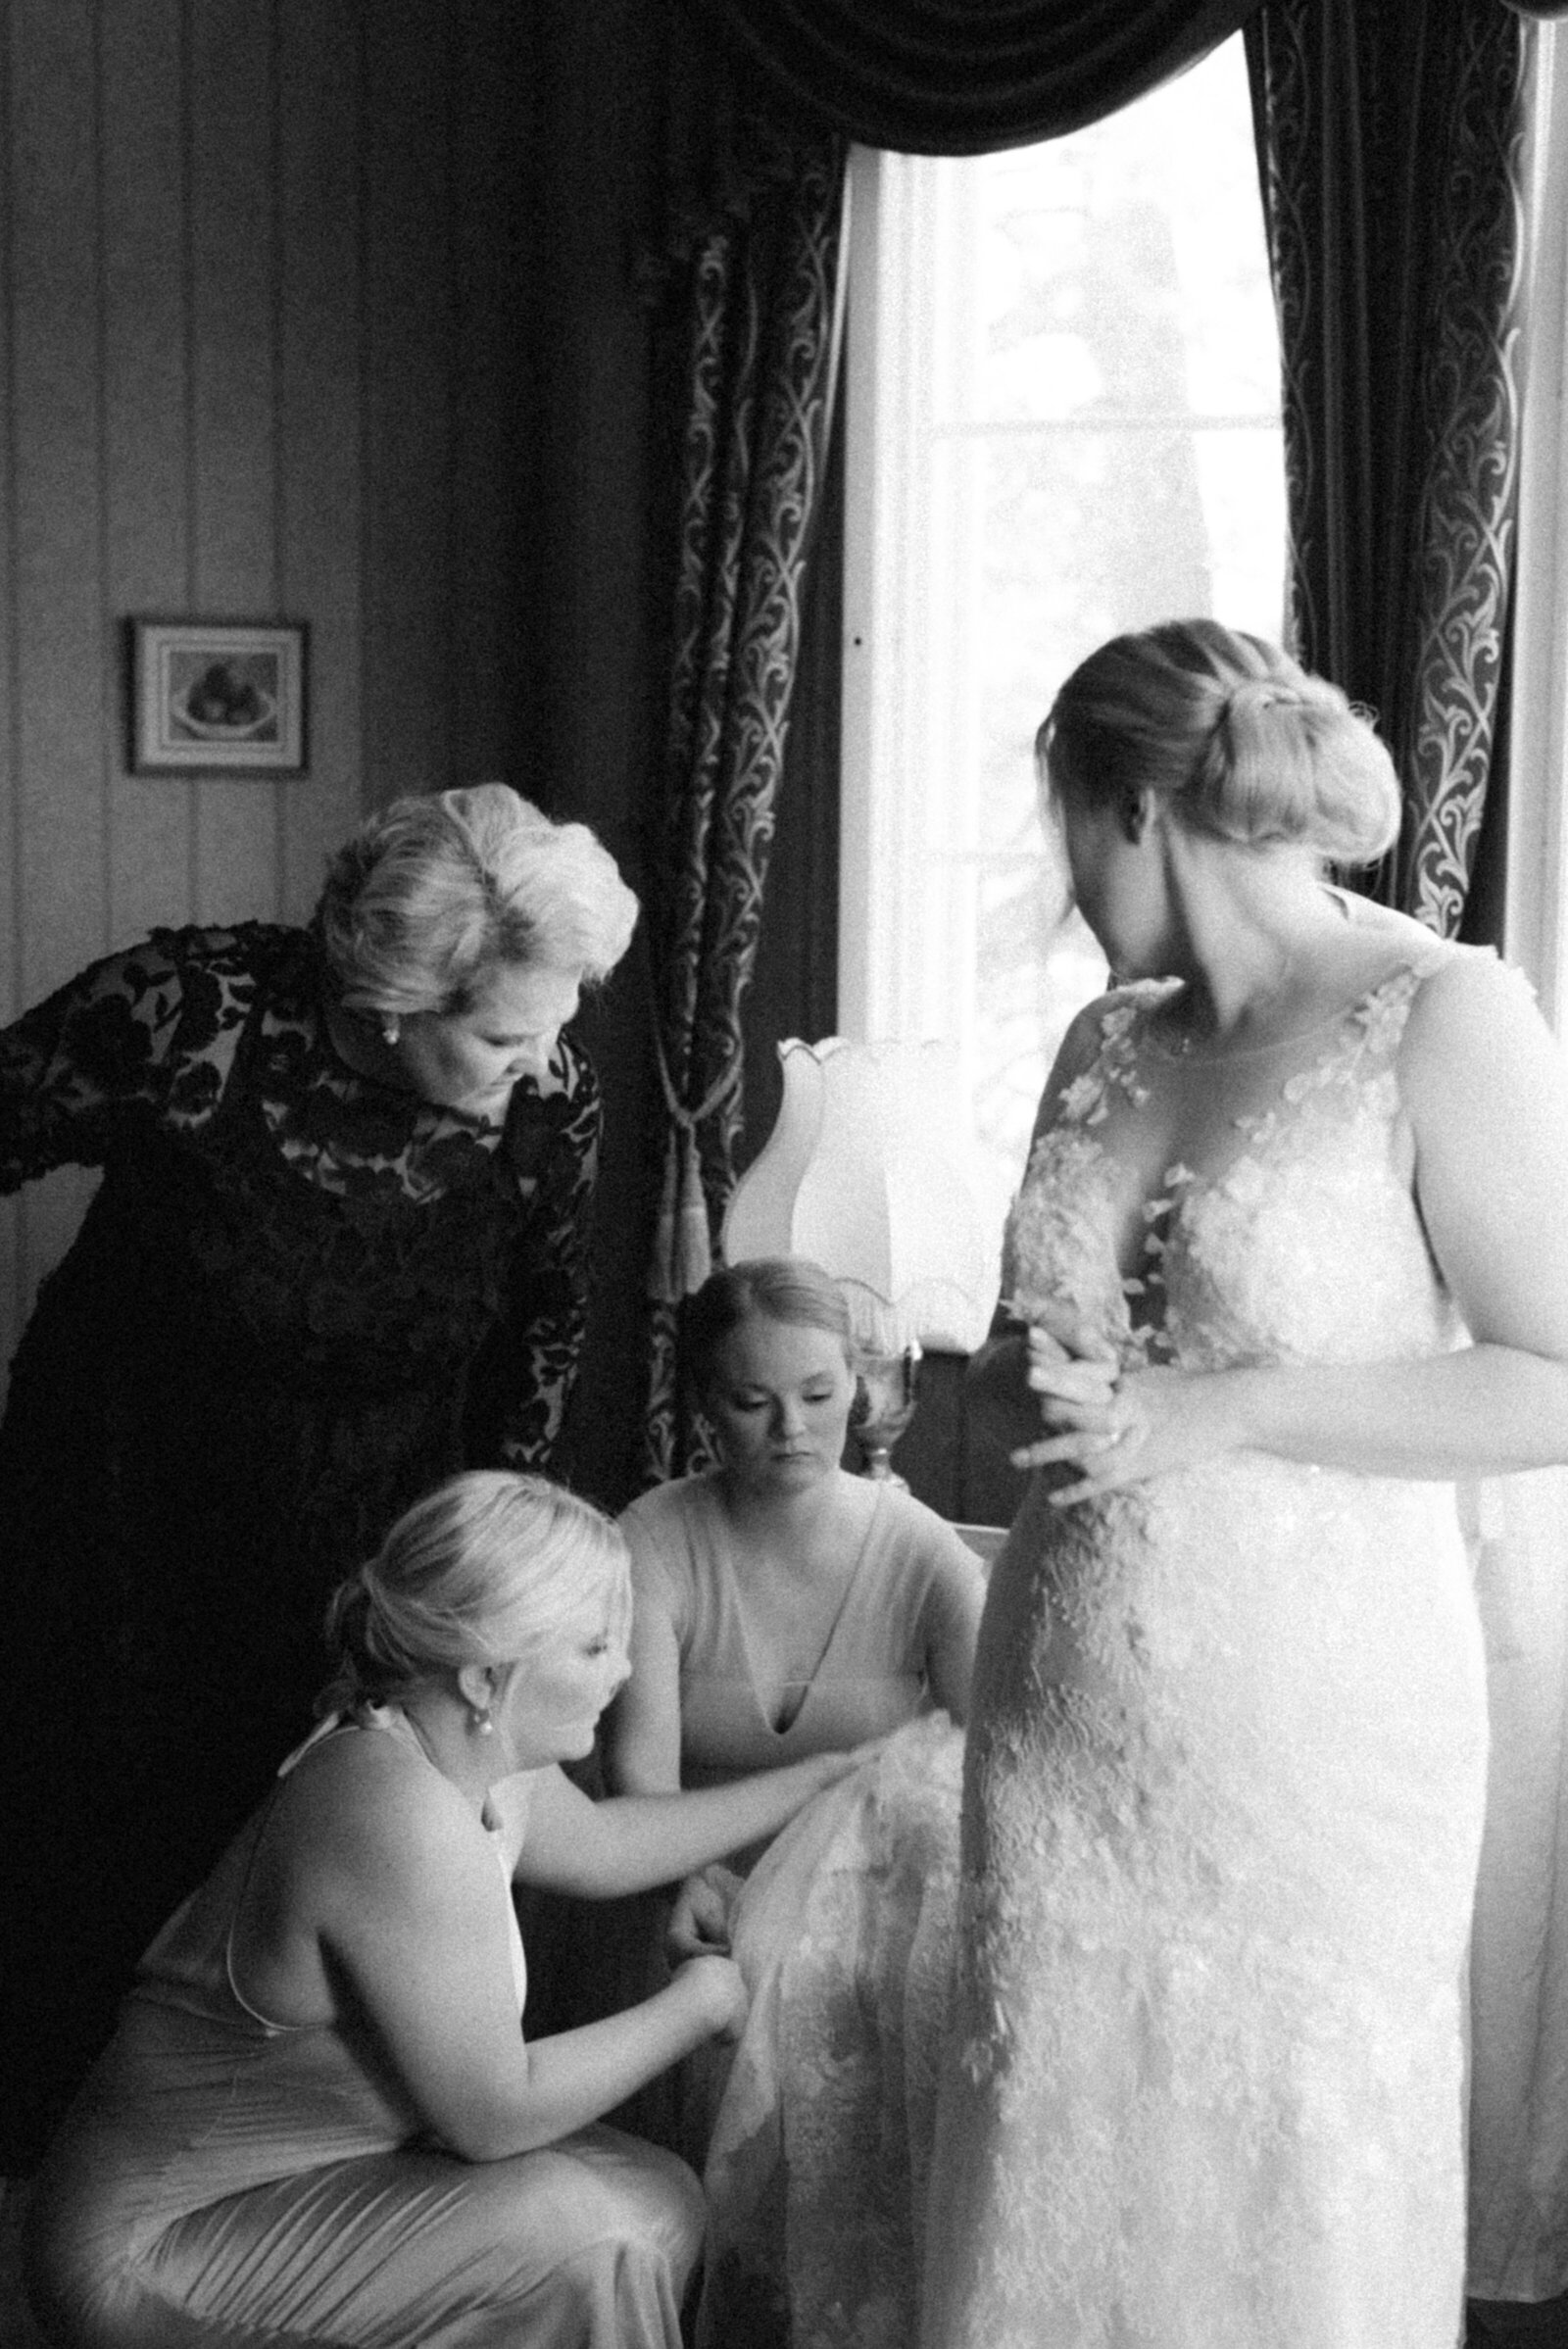 Bridesmaids are solving a problem with the wedding dress in an image photographed by wedding photographer Hannika Gabrielsson.